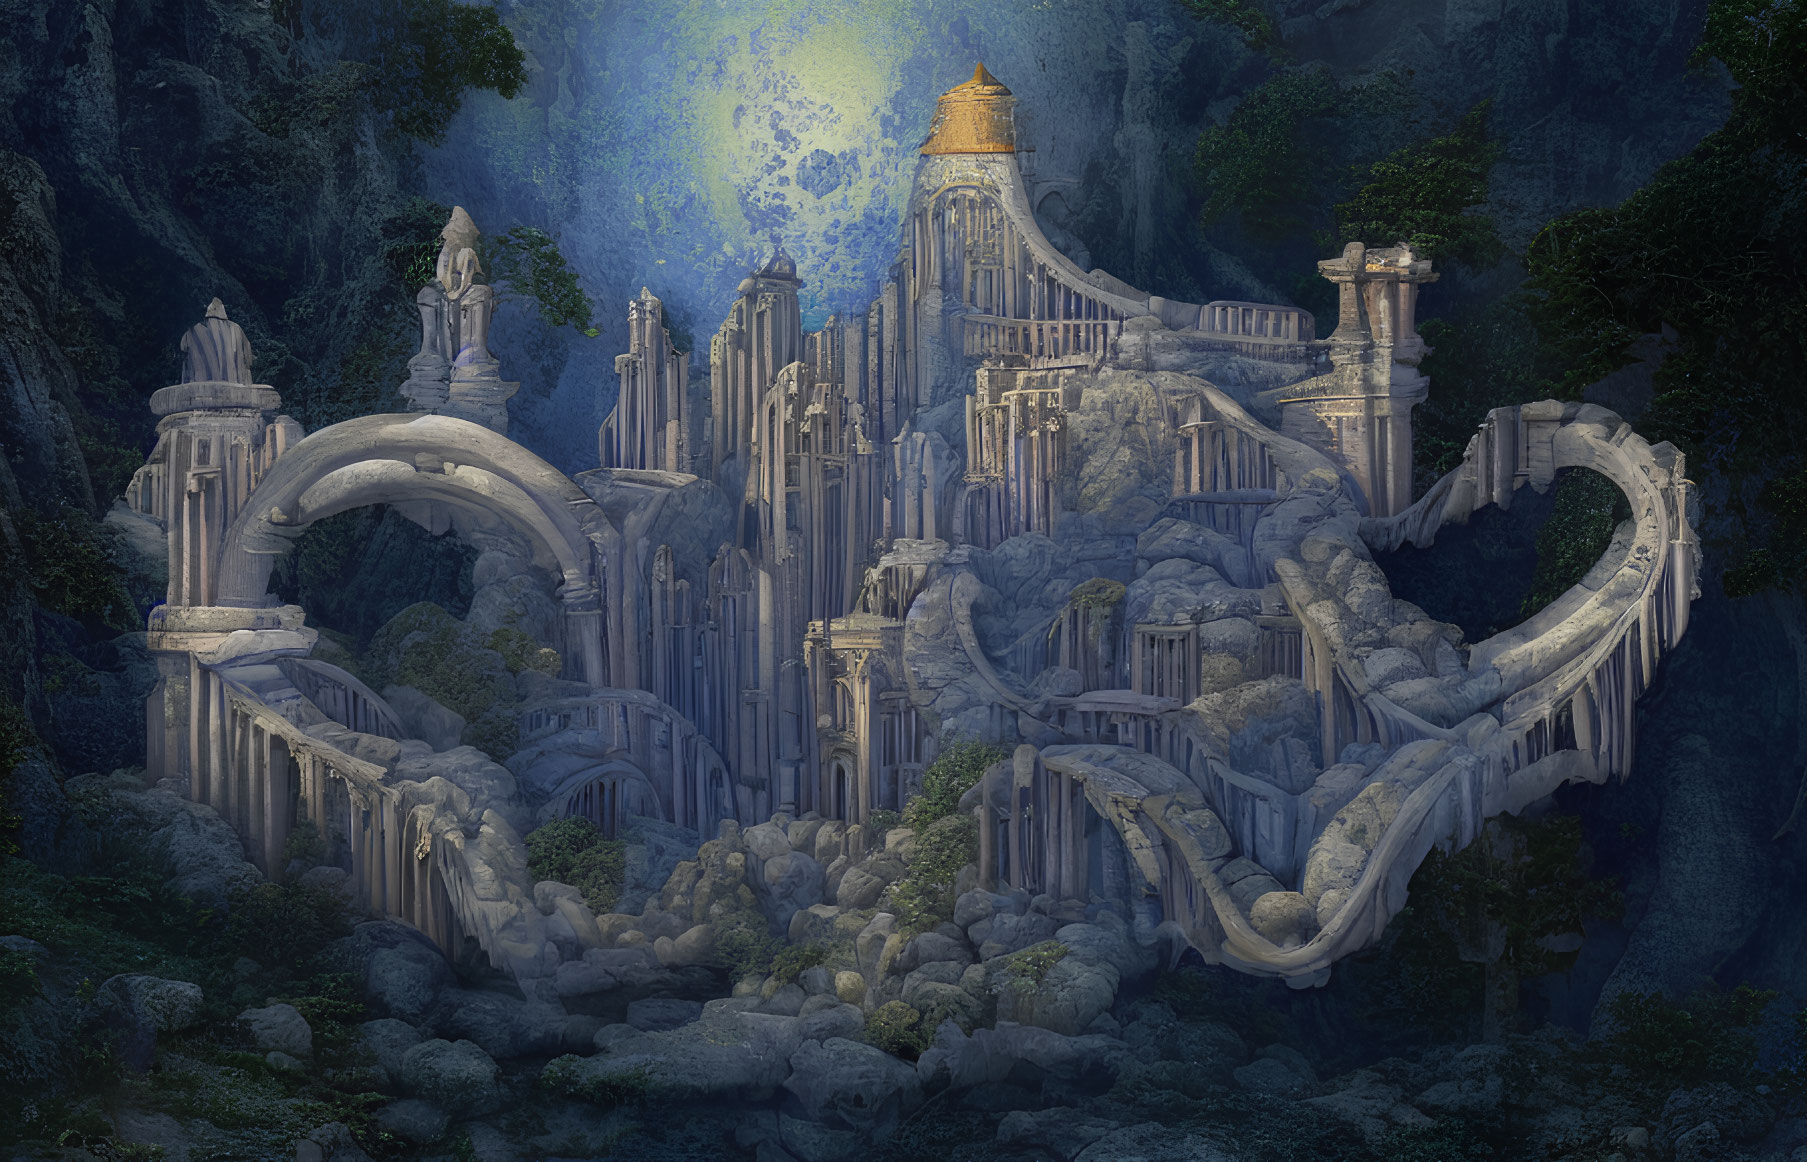 Fantasy palace with intricate architecture in cliffside forest at night